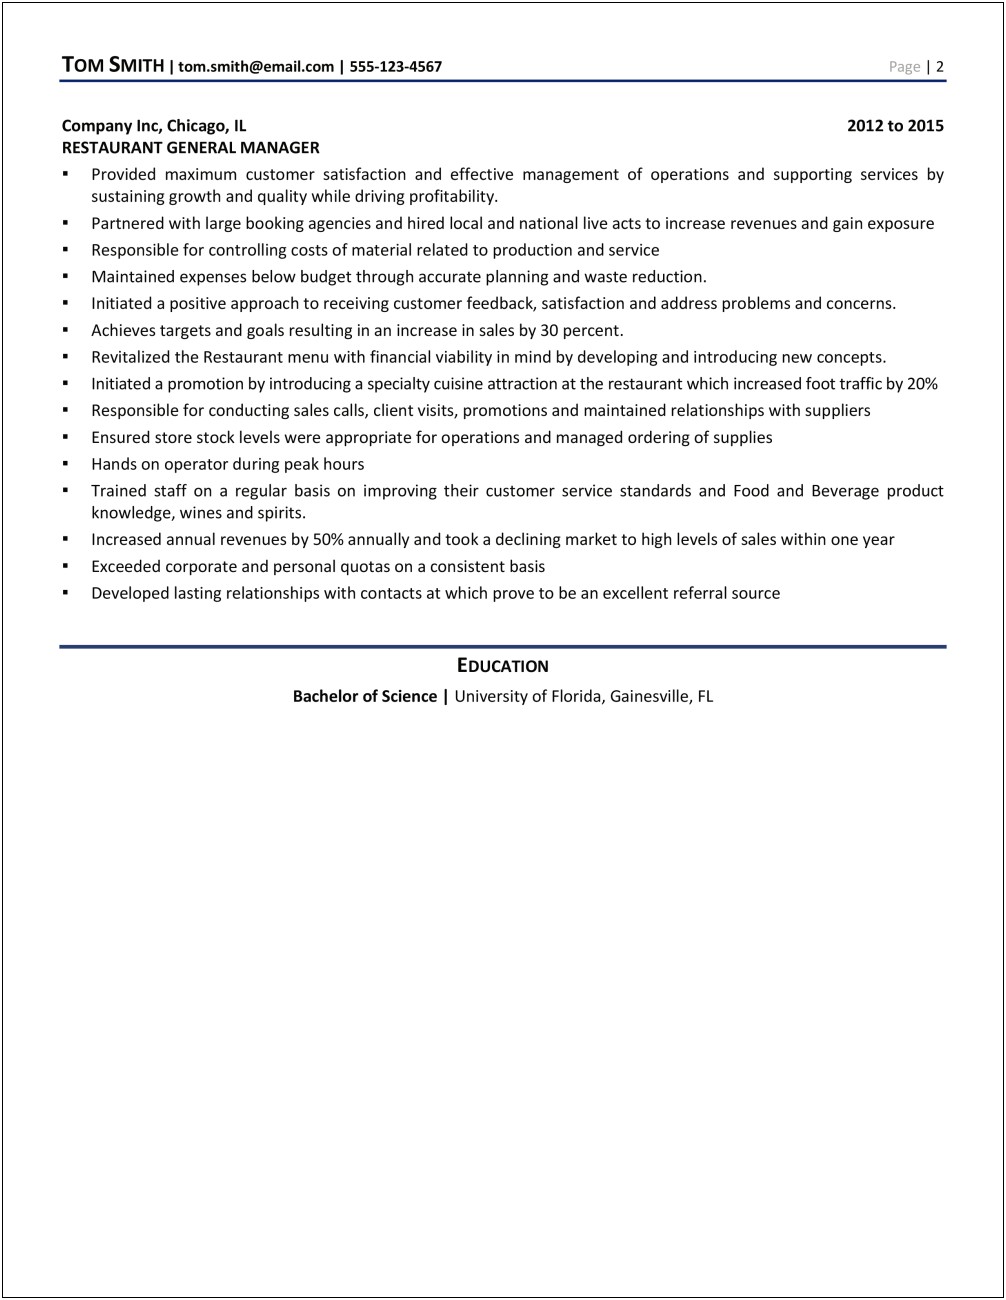 General Manager Objectives For A Resume